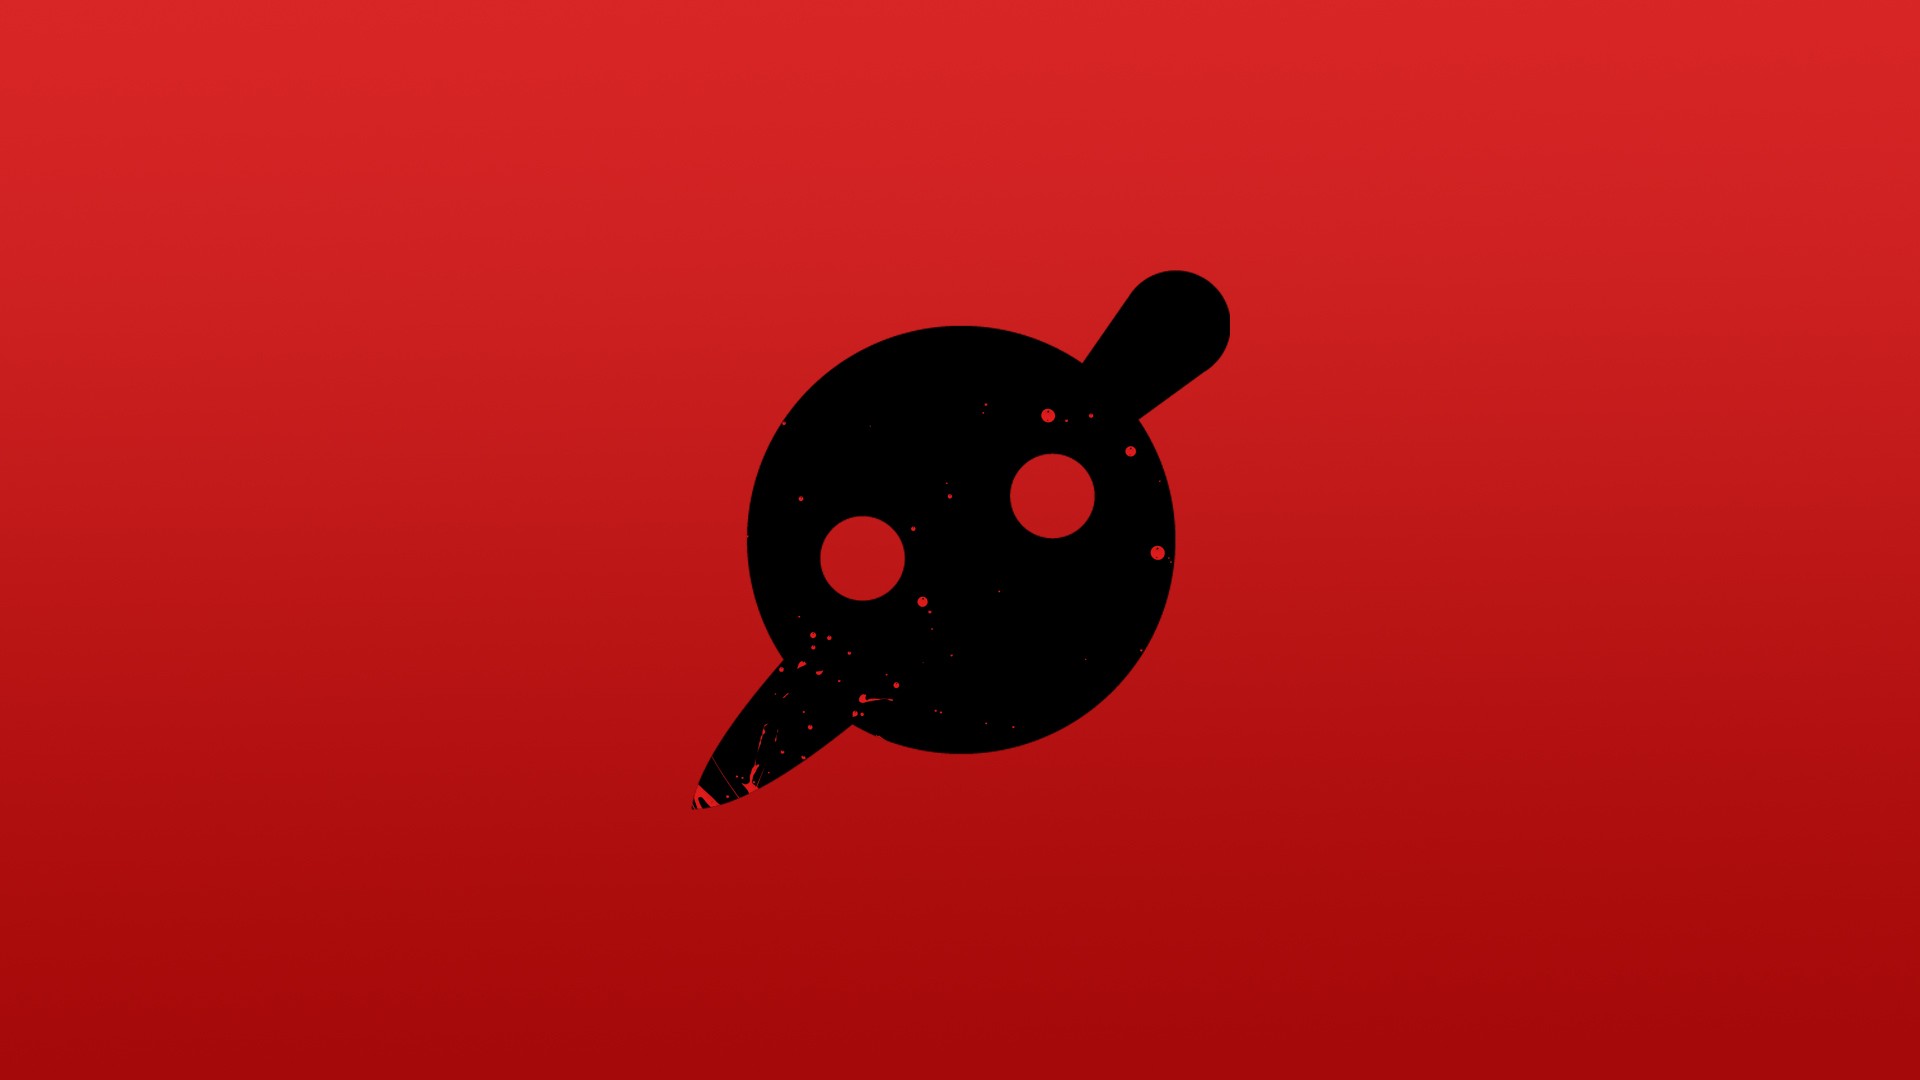 General 1920x1080 Knife Party simple background red background minimalism music artwork